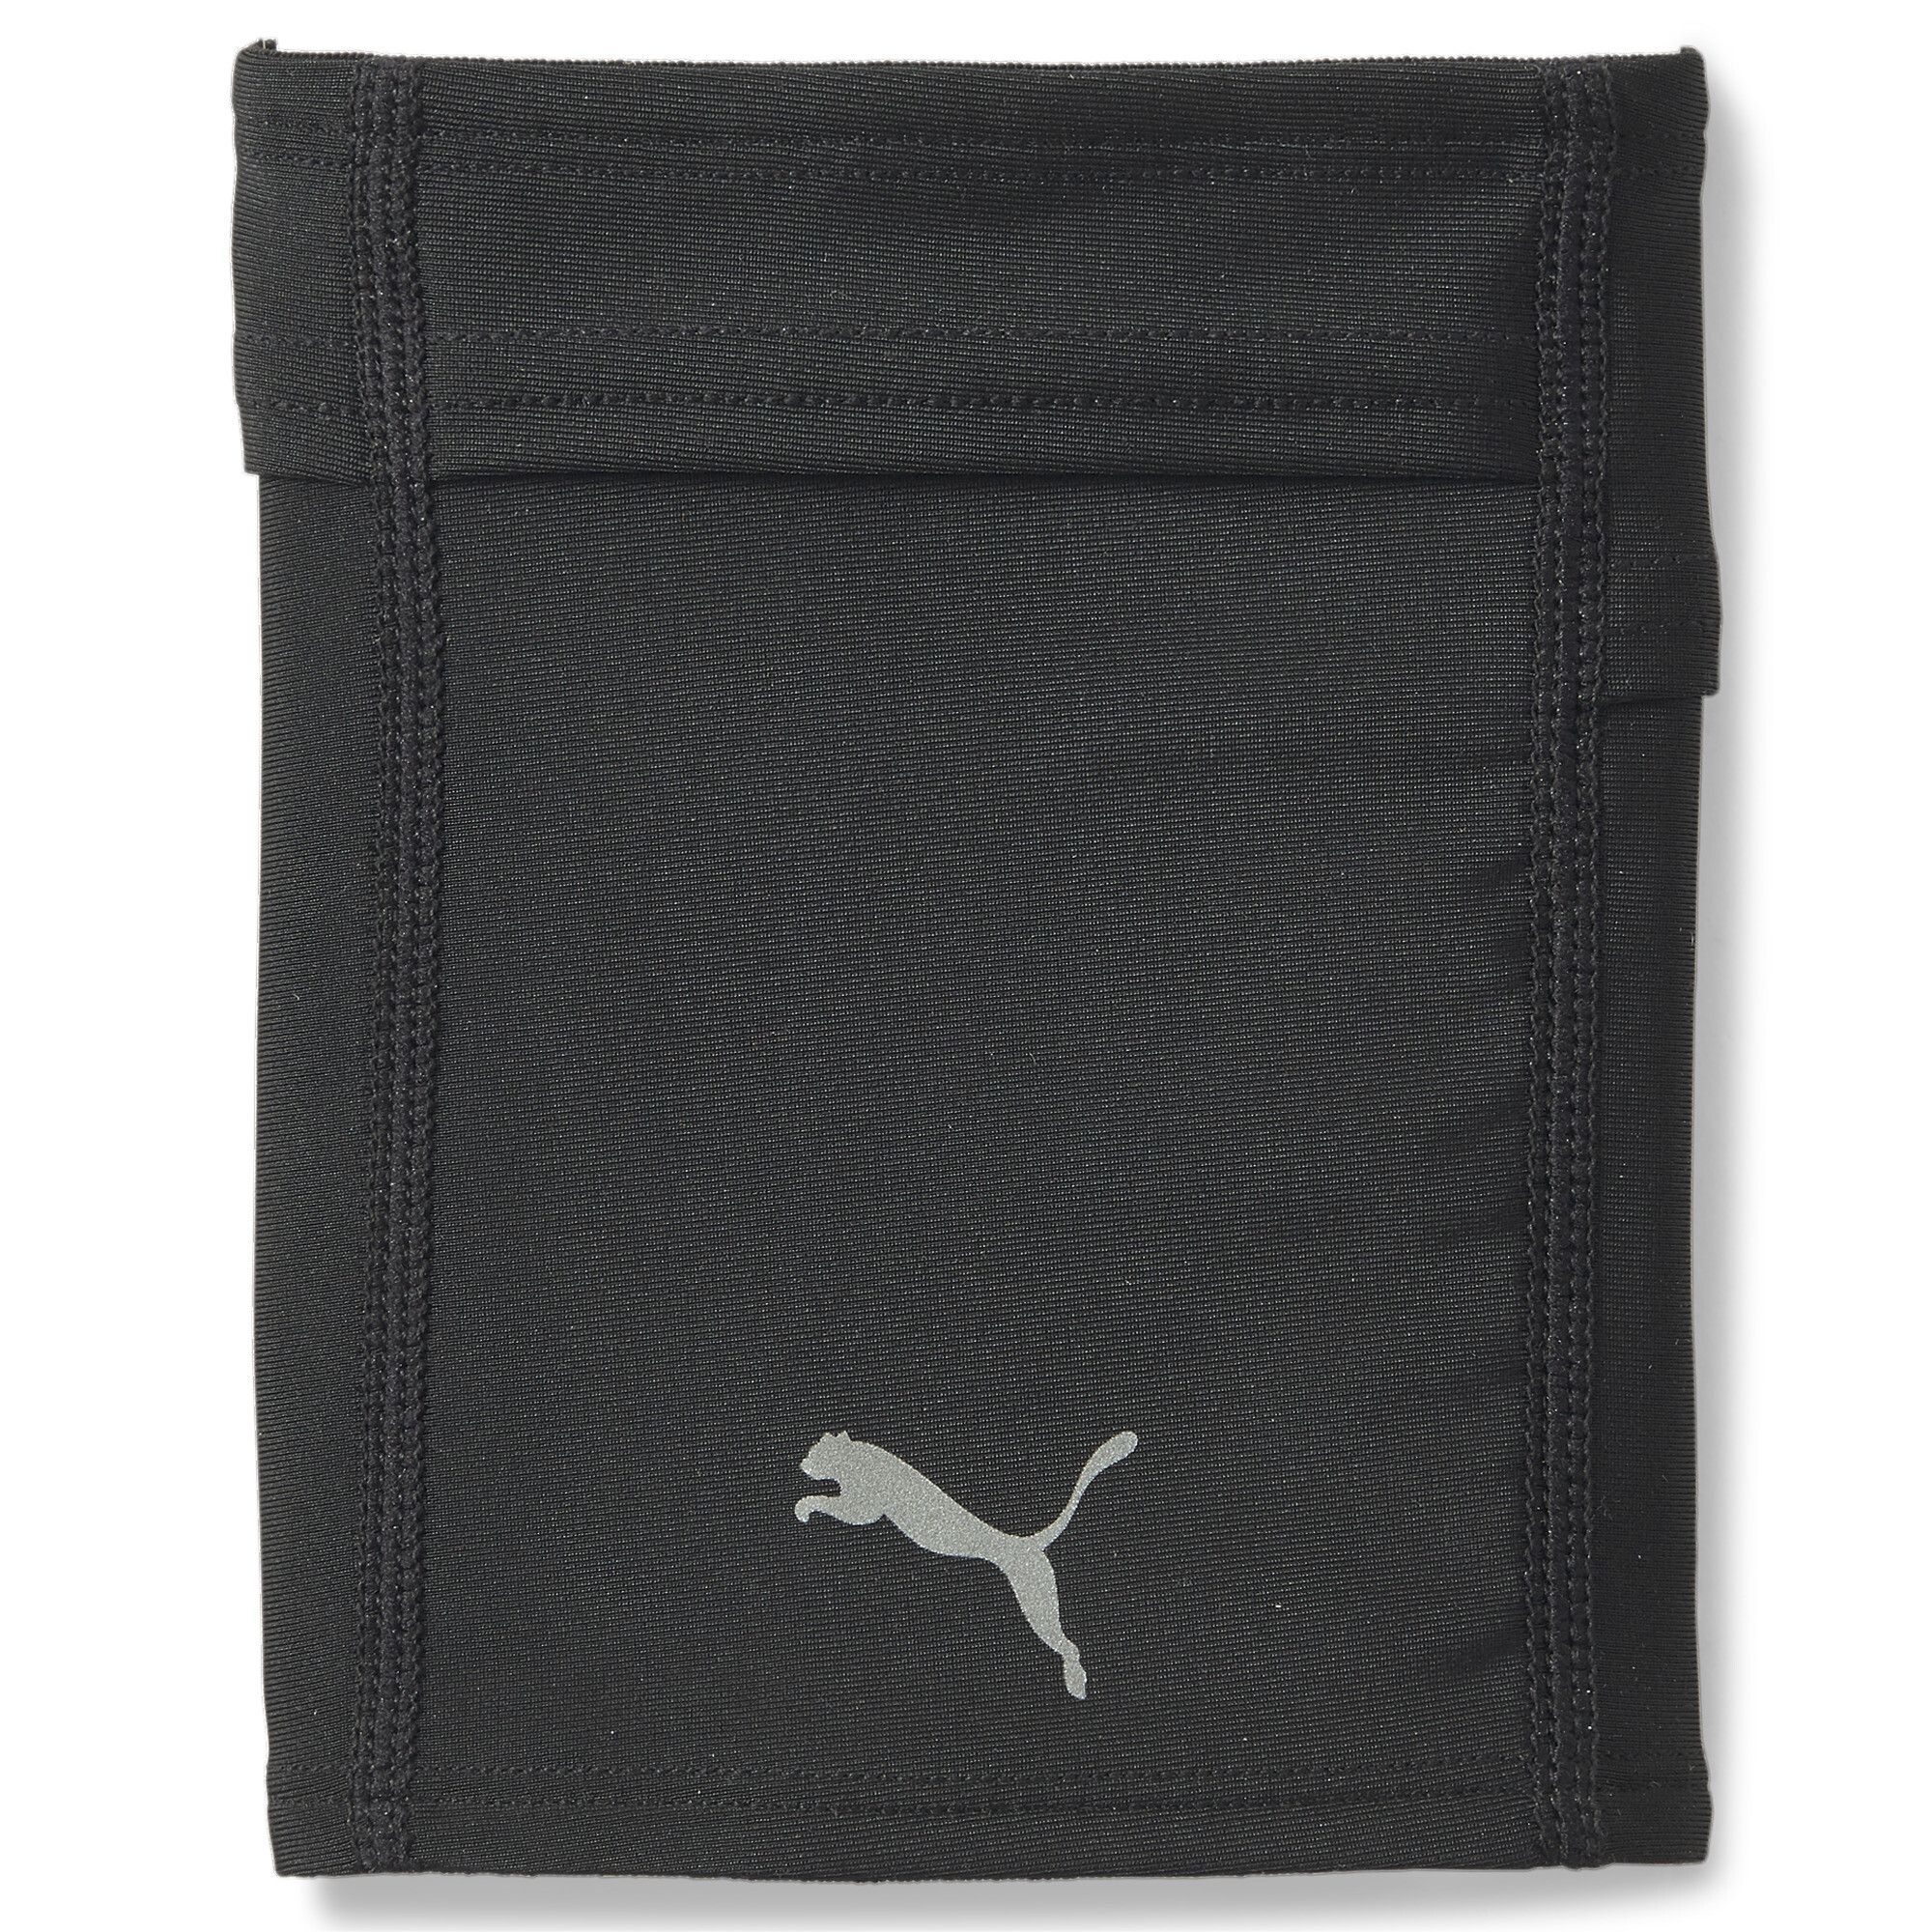 Men's PUMA Running Armband In Black, Size Small